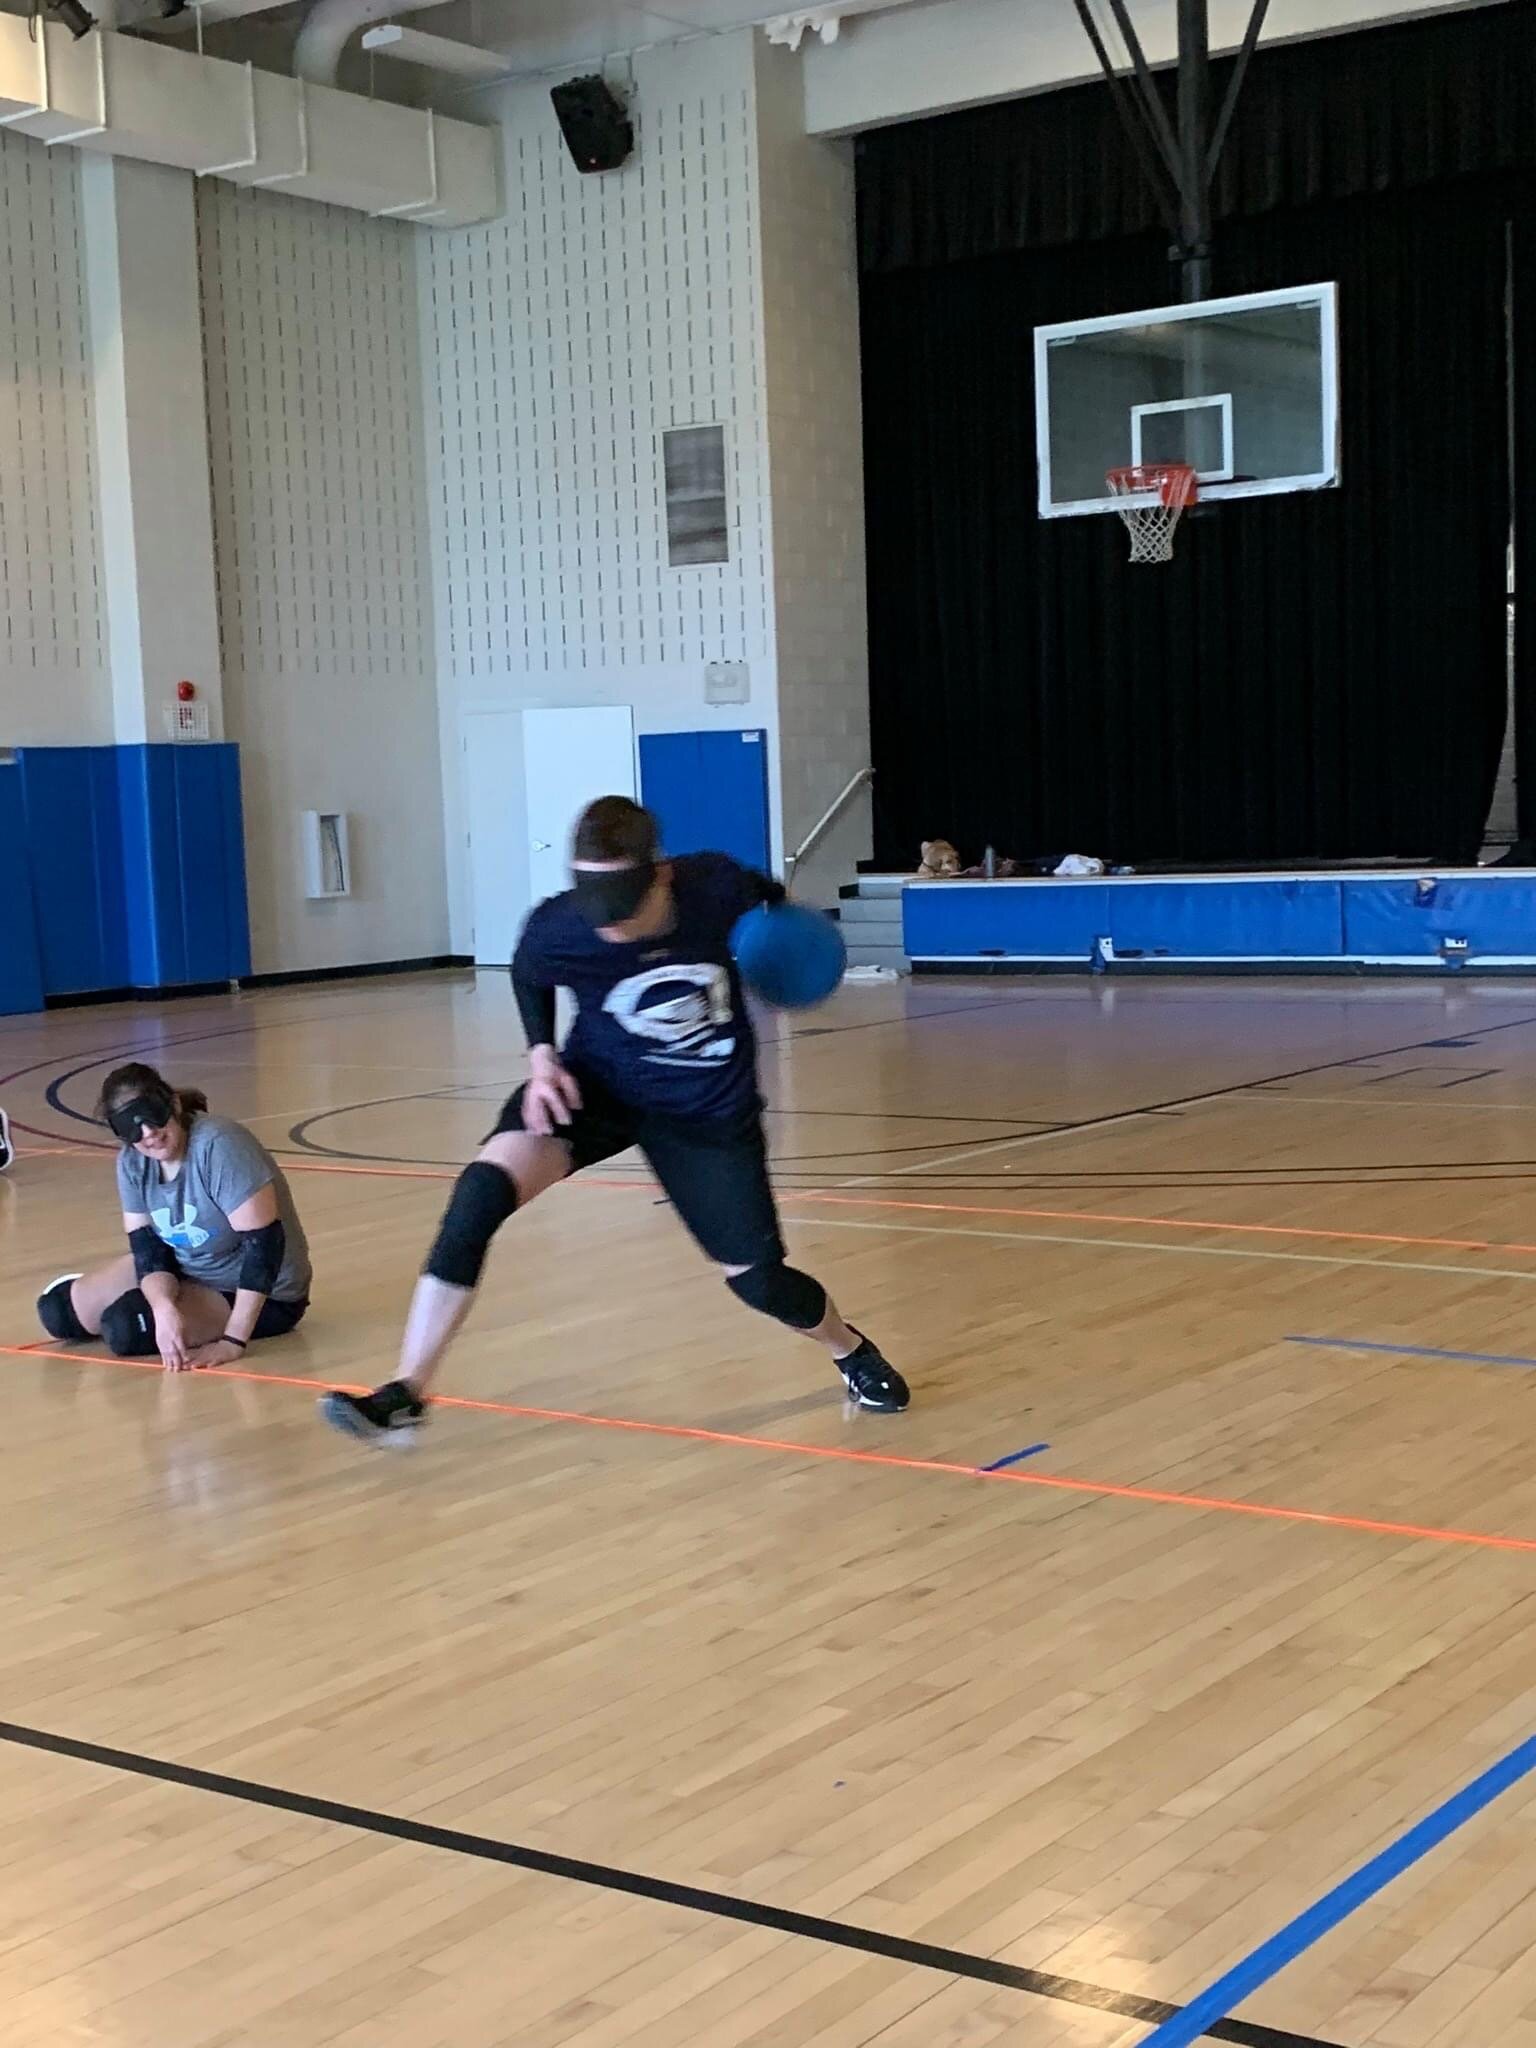 Action shot: WMABA Goalball player Caleb Berkemeier in the midst of throwing, and Lori, another player, is laying on the court in defensive position.